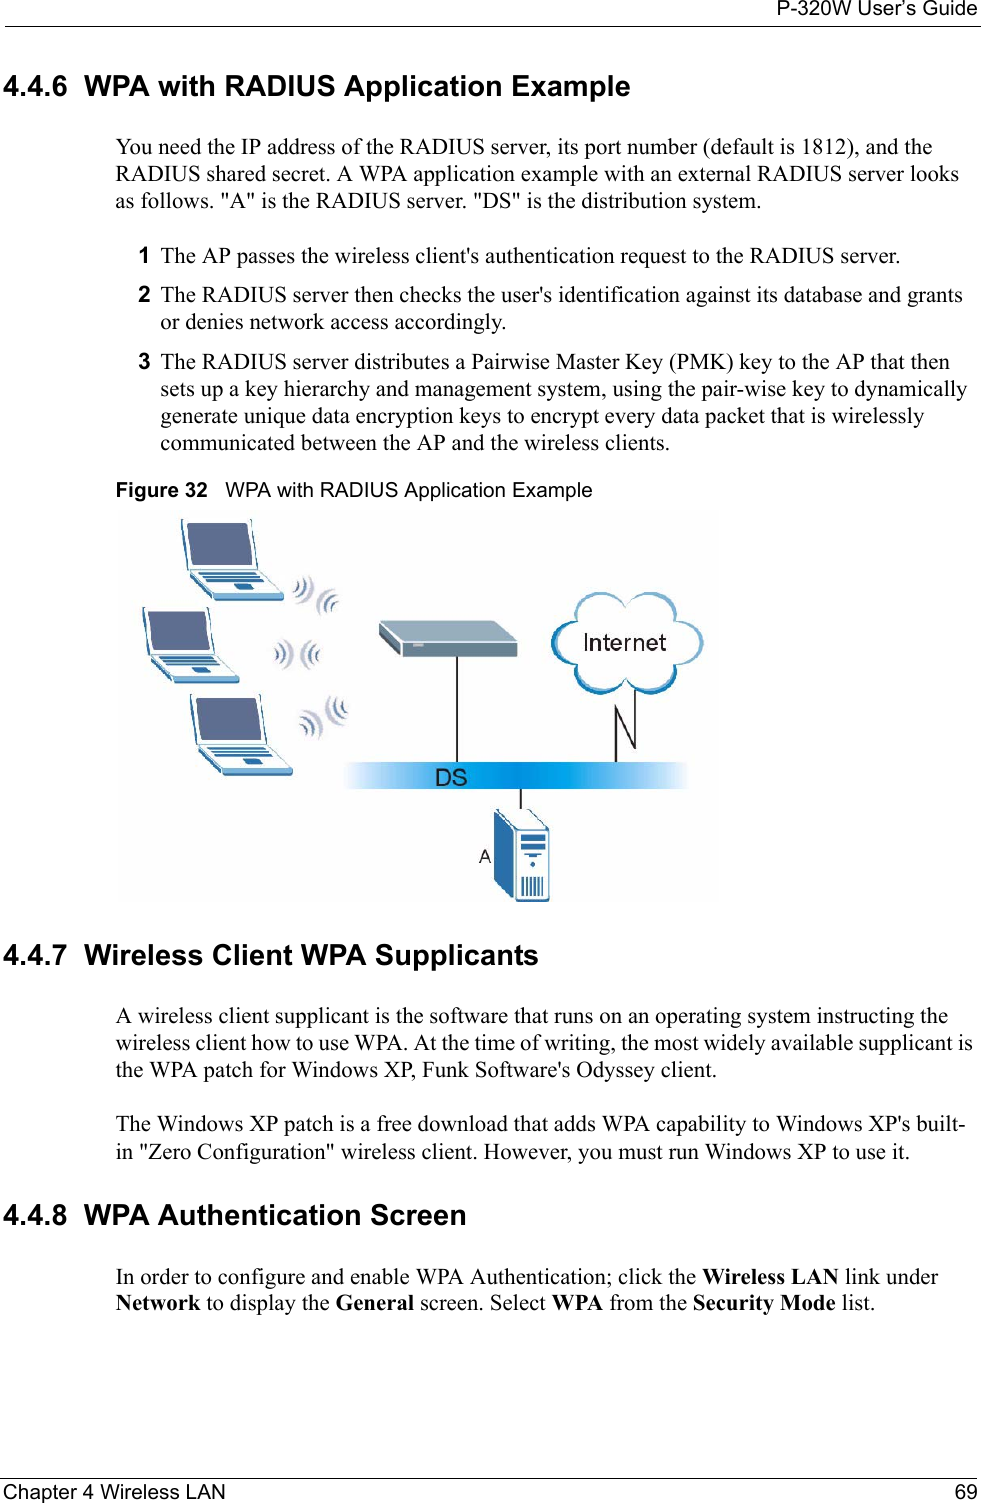 P-320W User’s GuideChapter 4 Wireless LAN 694.4.6  WPA with RADIUS Application ExampleYou need the IP address of the RADIUS server, its port number (default is 1812), and the RADIUS shared secret. A WPA application example with an external RADIUS server looks as follows. &quot;A&quot; is the RADIUS server. &quot;DS&quot; is the distribution system.1The AP passes the wireless client&apos;s authentication request to the RADIUS server.2The RADIUS server then checks the user&apos;s identification against its database and grants or denies network access accordingly.3The RADIUS server distributes a Pairwise Master Key (PMK) key to the AP that then sets up a key hierarchy and management system, using the pair-wise key to dynamically generate unique data encryption keys to encrypt every data packet that is wirelessly communicated between the AP and the wireless clients.Figure 32   WPA with RADIUS Application Example4.4.7  Wireless Client WPA SupplicantsA wireless client supplicant is the software that runs on an operating system instructing the wireless client how to use WPA. At the time of writing, the most widely available supplicant is the WPA patch for Windows XP, Funk Software&apos;s Odyssey client. The Windows XP patch is a free download that adds WPA capability to Windows XP&apos;s built-in &quot;Zero Configuration&quot; wireless client. However, you must run Windows XP to use it.4.4.8  WPA Authentication ScreenIn order to configure and enable WPA Authentication; click the Wireless LAN link under Network to display the General screen. Select WPA from the Security Mode list.